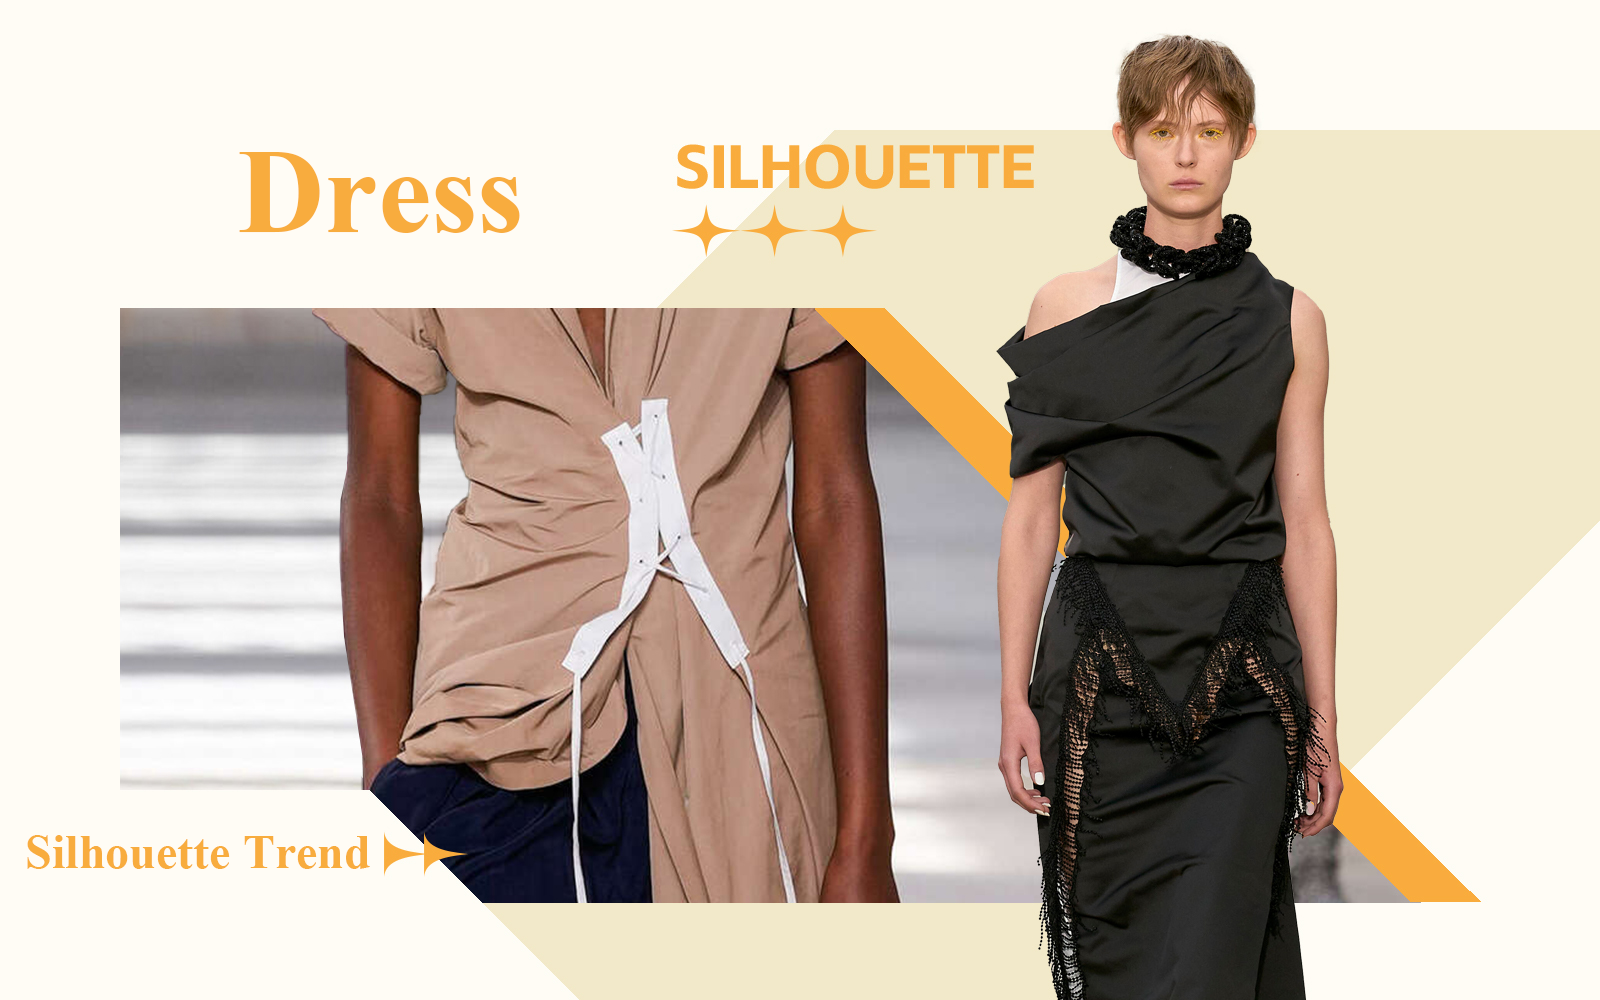 Simple and Romantic -- The Silhouette Trend for Women's Dress